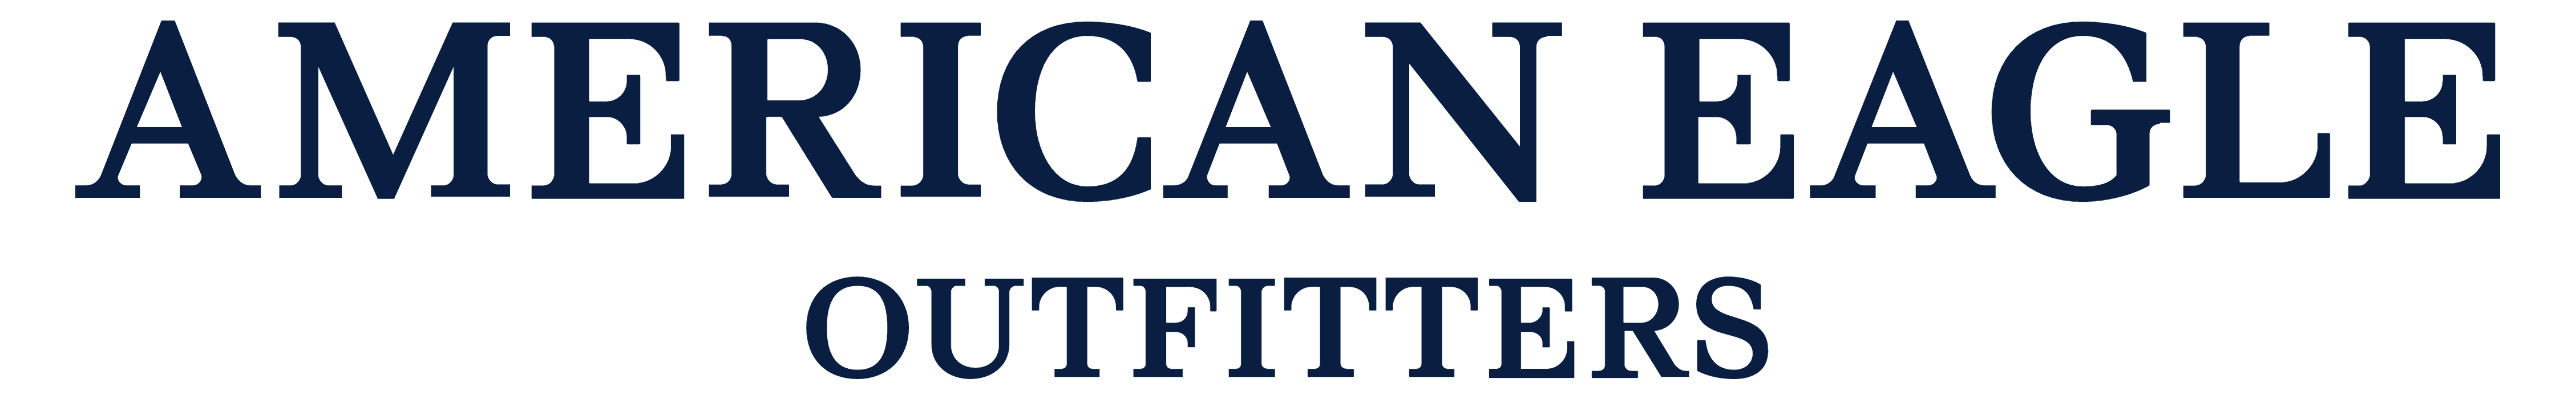 American_Eagle_Outfitters_logo_logotype